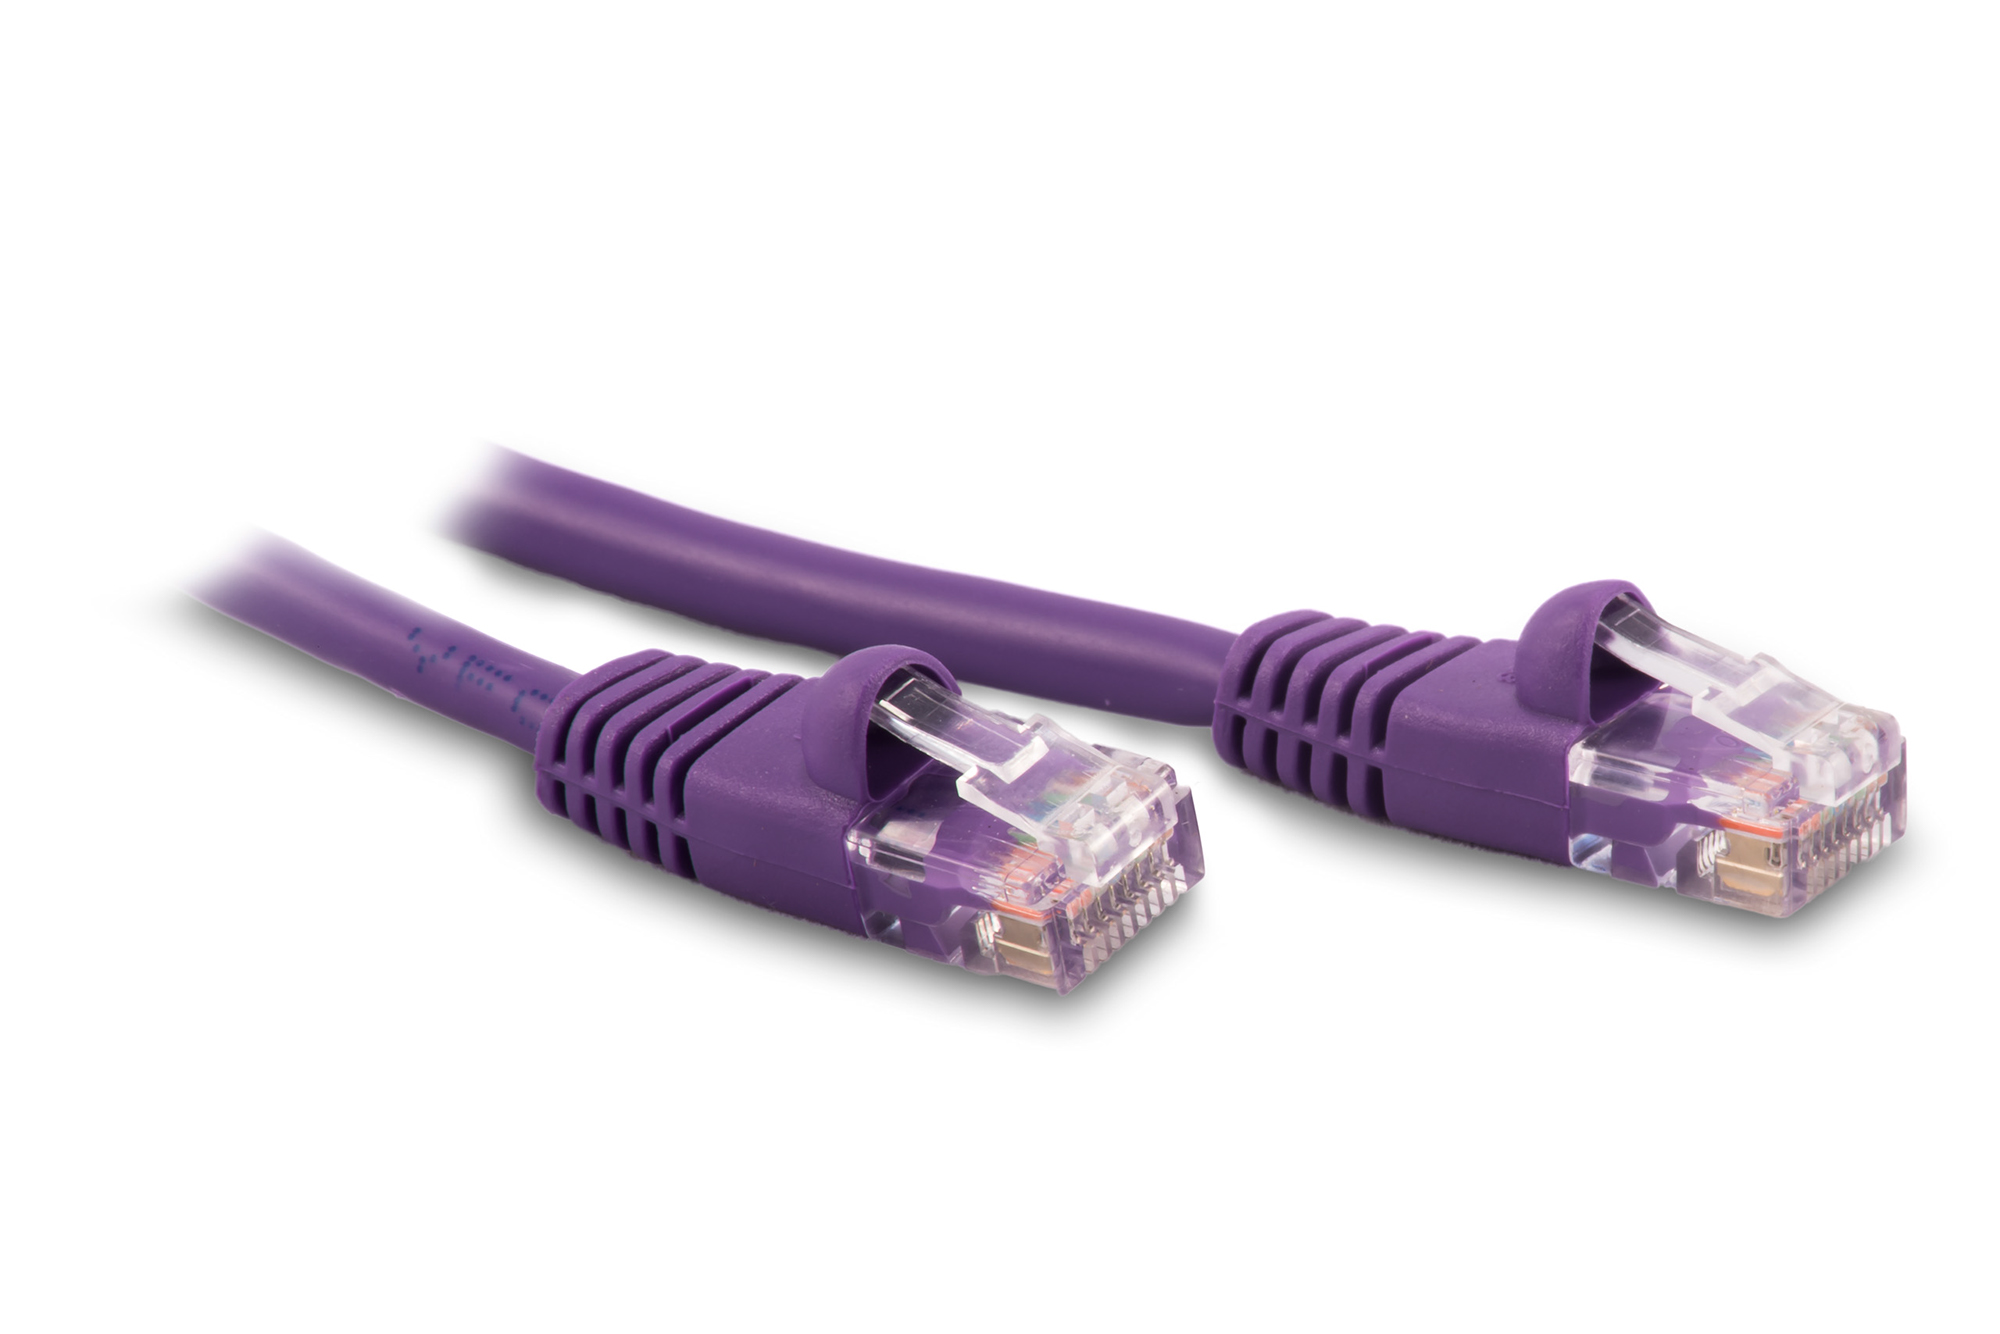 10ft Cat6 Ethernet Patch Cable - Violet Color - Snagless Boot